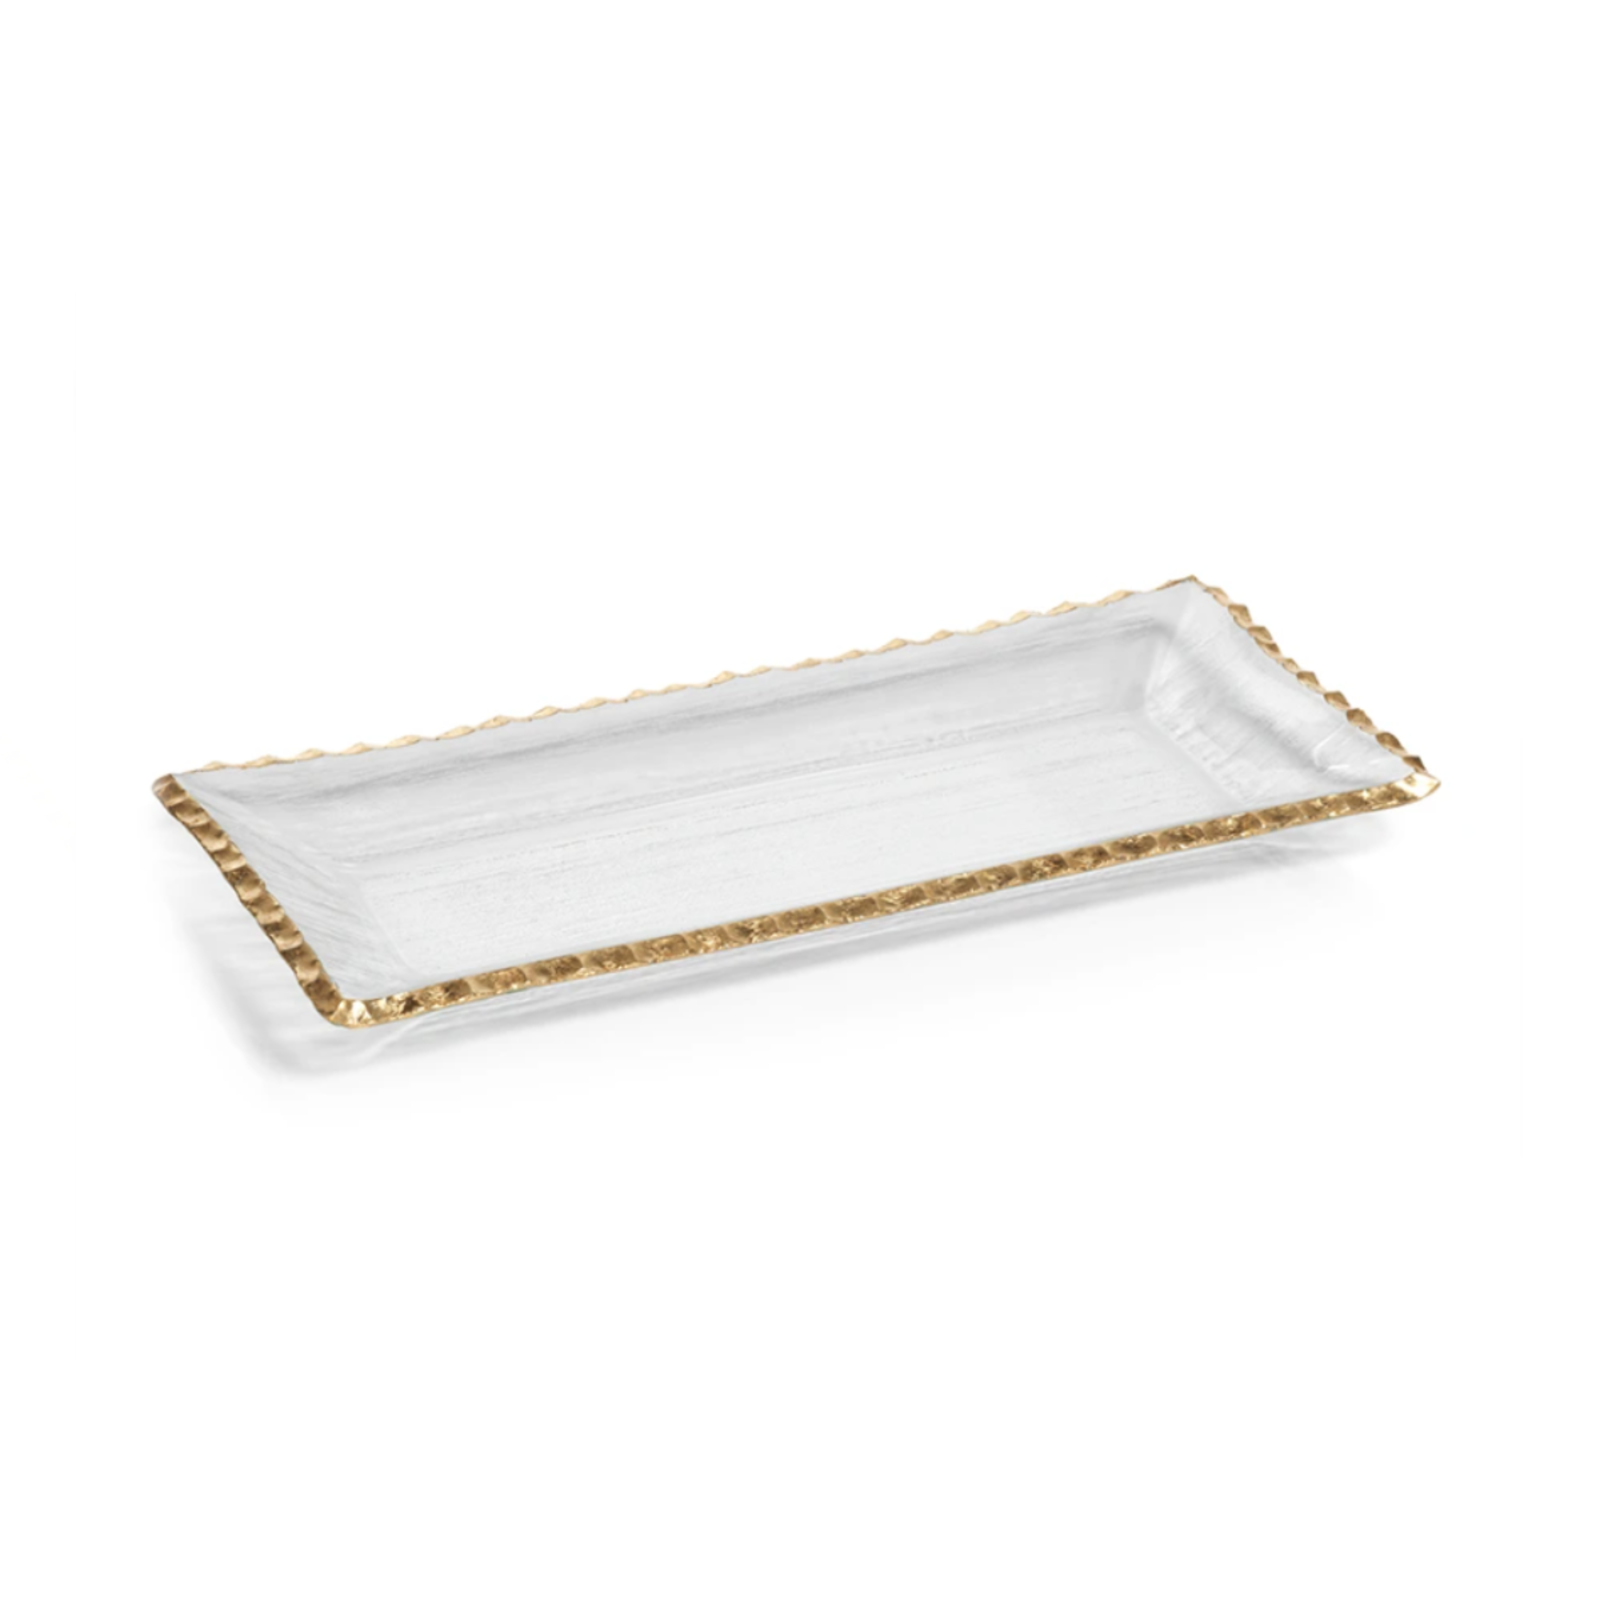 Zodax Textured Rect Tray with Jagged Gold Rim 14.5"    CH-5768 loading=